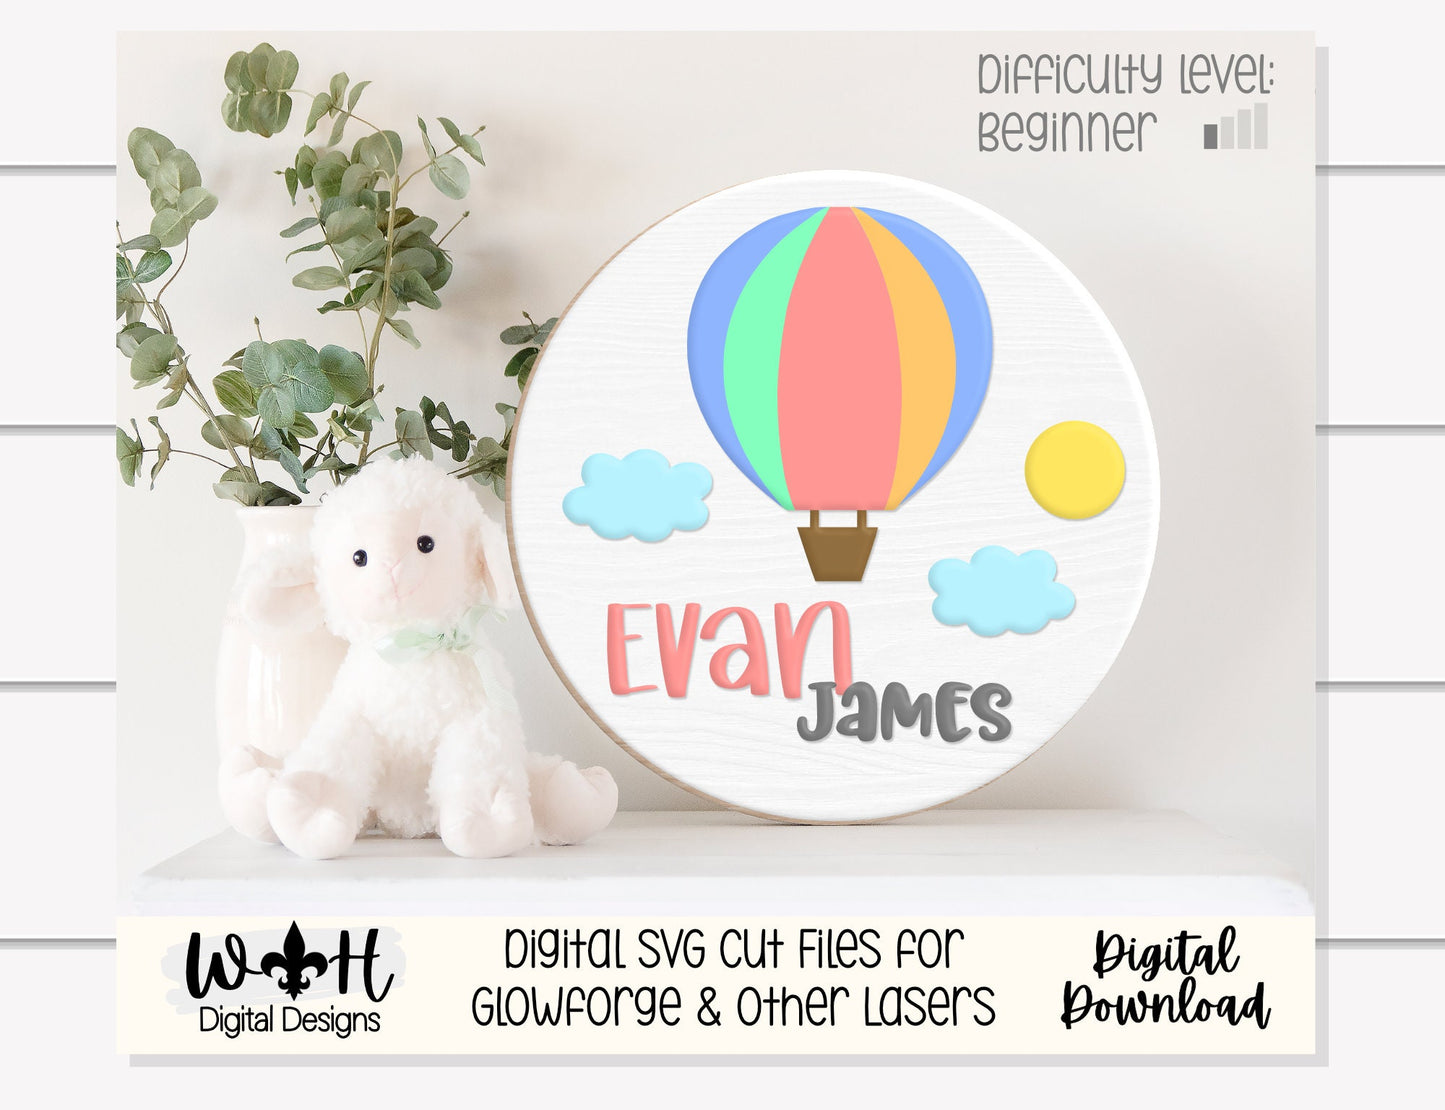 Hot Air Balloon Baby Nursery Round - Sign Making Home Decor and DIY Kits - Cut File For Glowforge Lasers - Digital SVG File